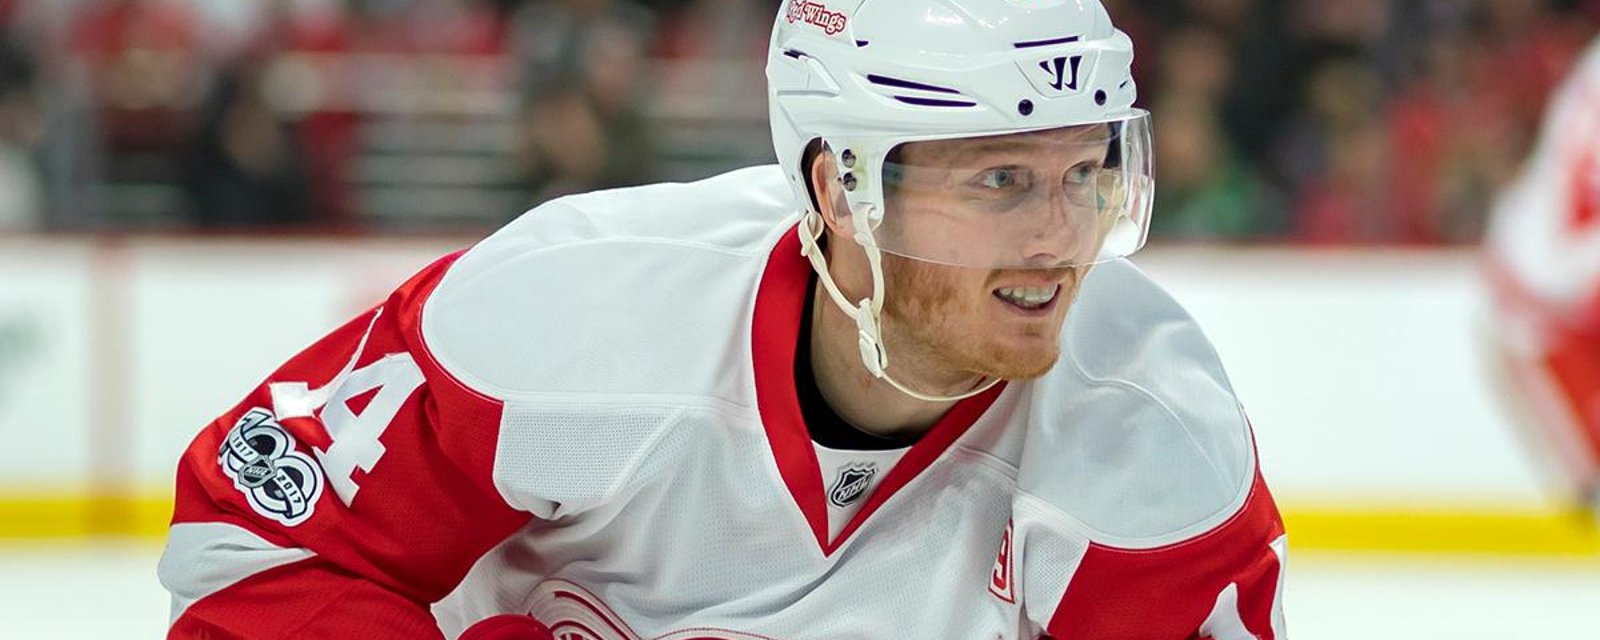 Injury Report: Wings give update on Nyquist’s status